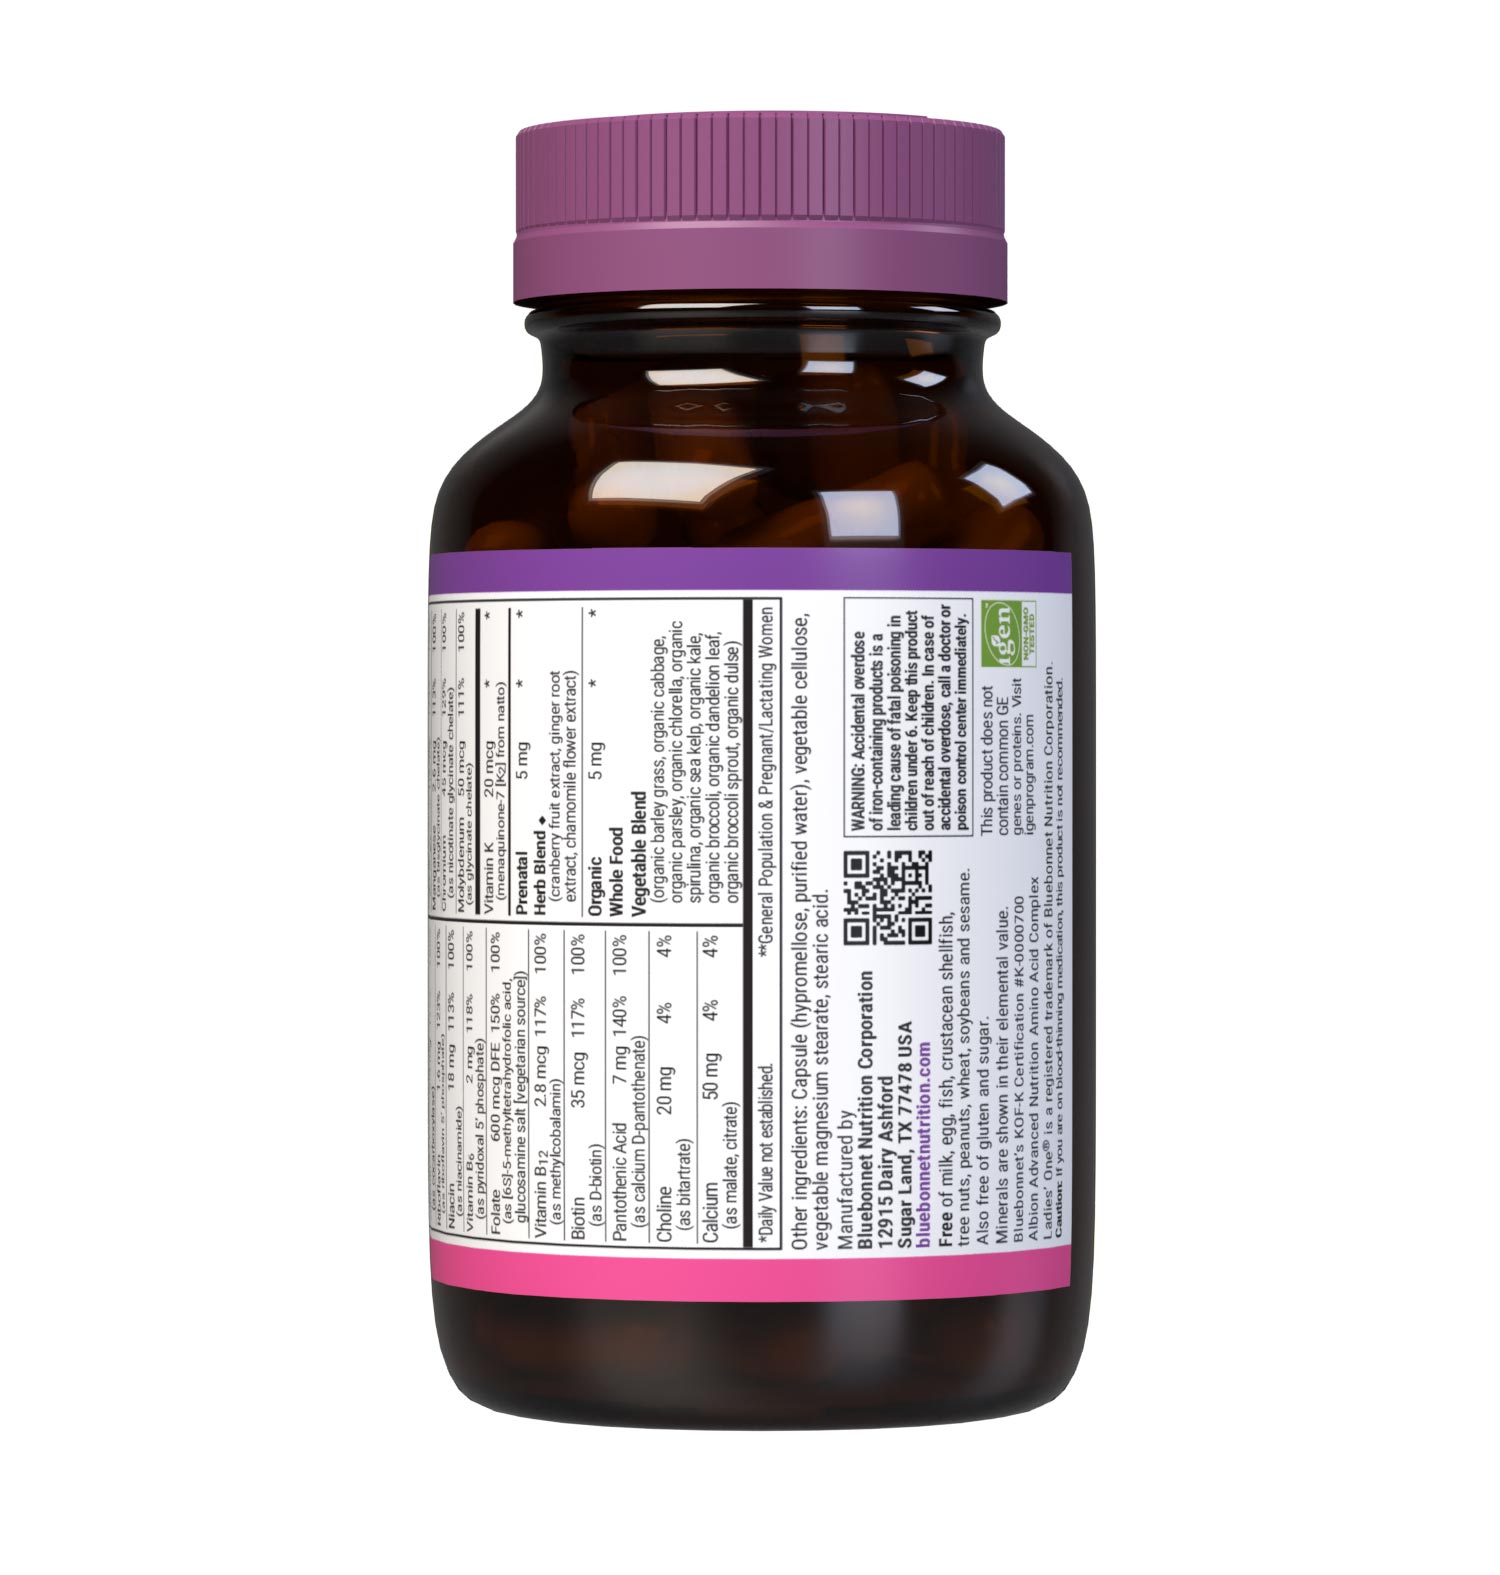 Bluebonnet's Ladies One prenatal whole food-based multiple 30 vegetable capsules is formulated with highly bioavailable non-GMO ingredients such as active coenzyme forms of B vitamins, vitamin K2, vitamin E from sunflower along with sustainably harvested and wildcrafted herbs, superfruits and vegetables. Supplement facts panel bottom. #size_60 count